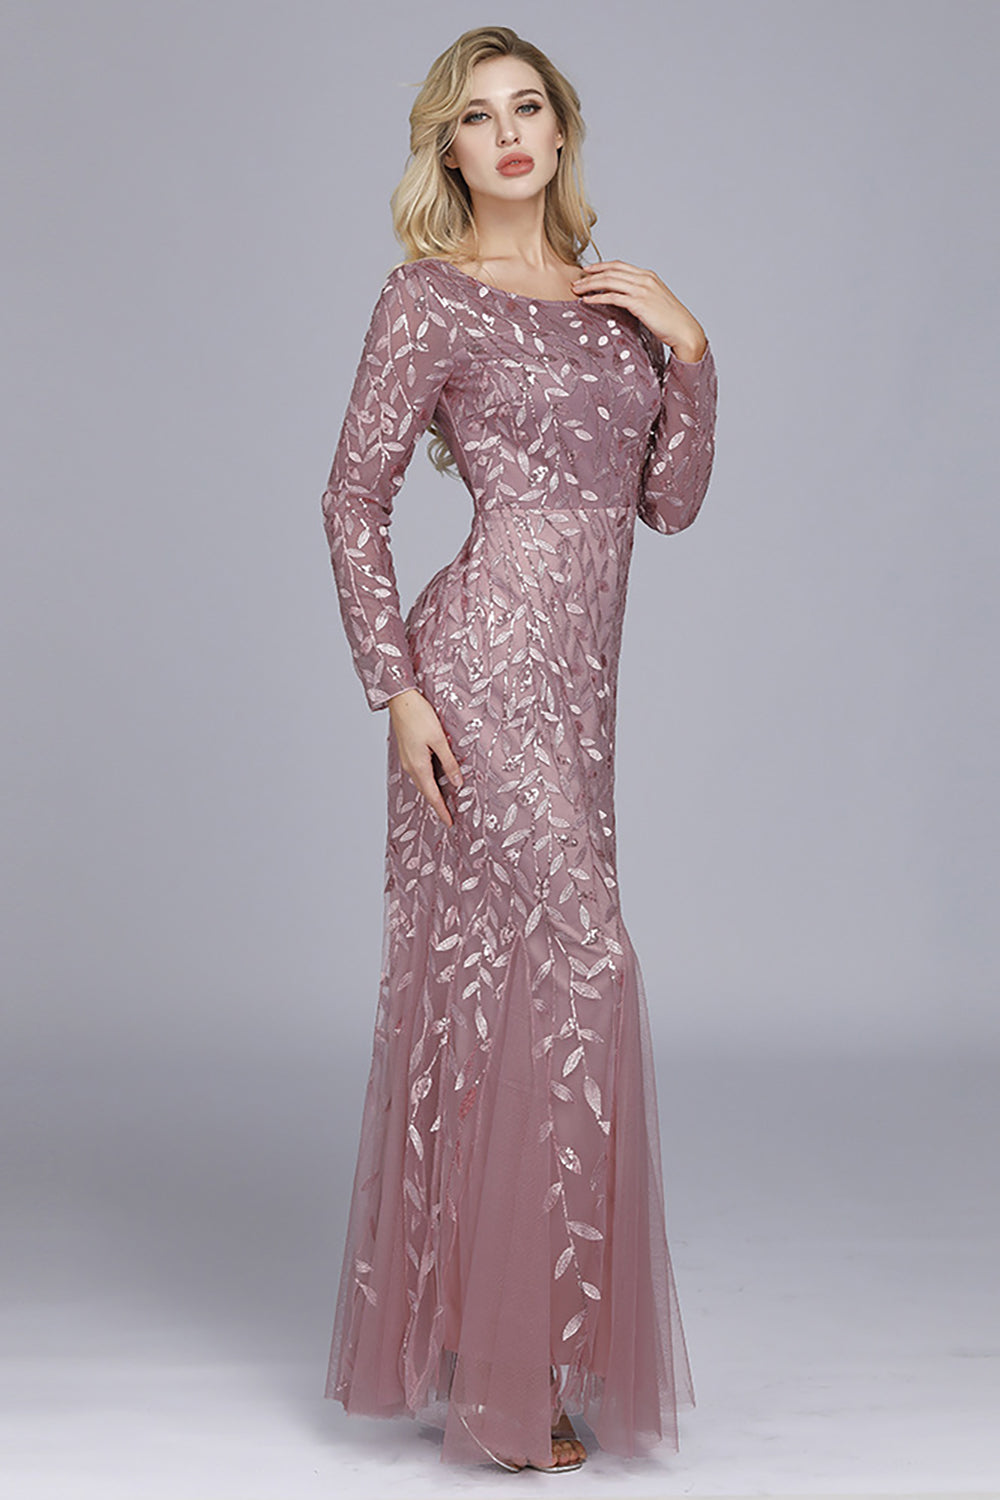 Gold Mermaid Sequins Tulle Evening Dress With Long Sleeves